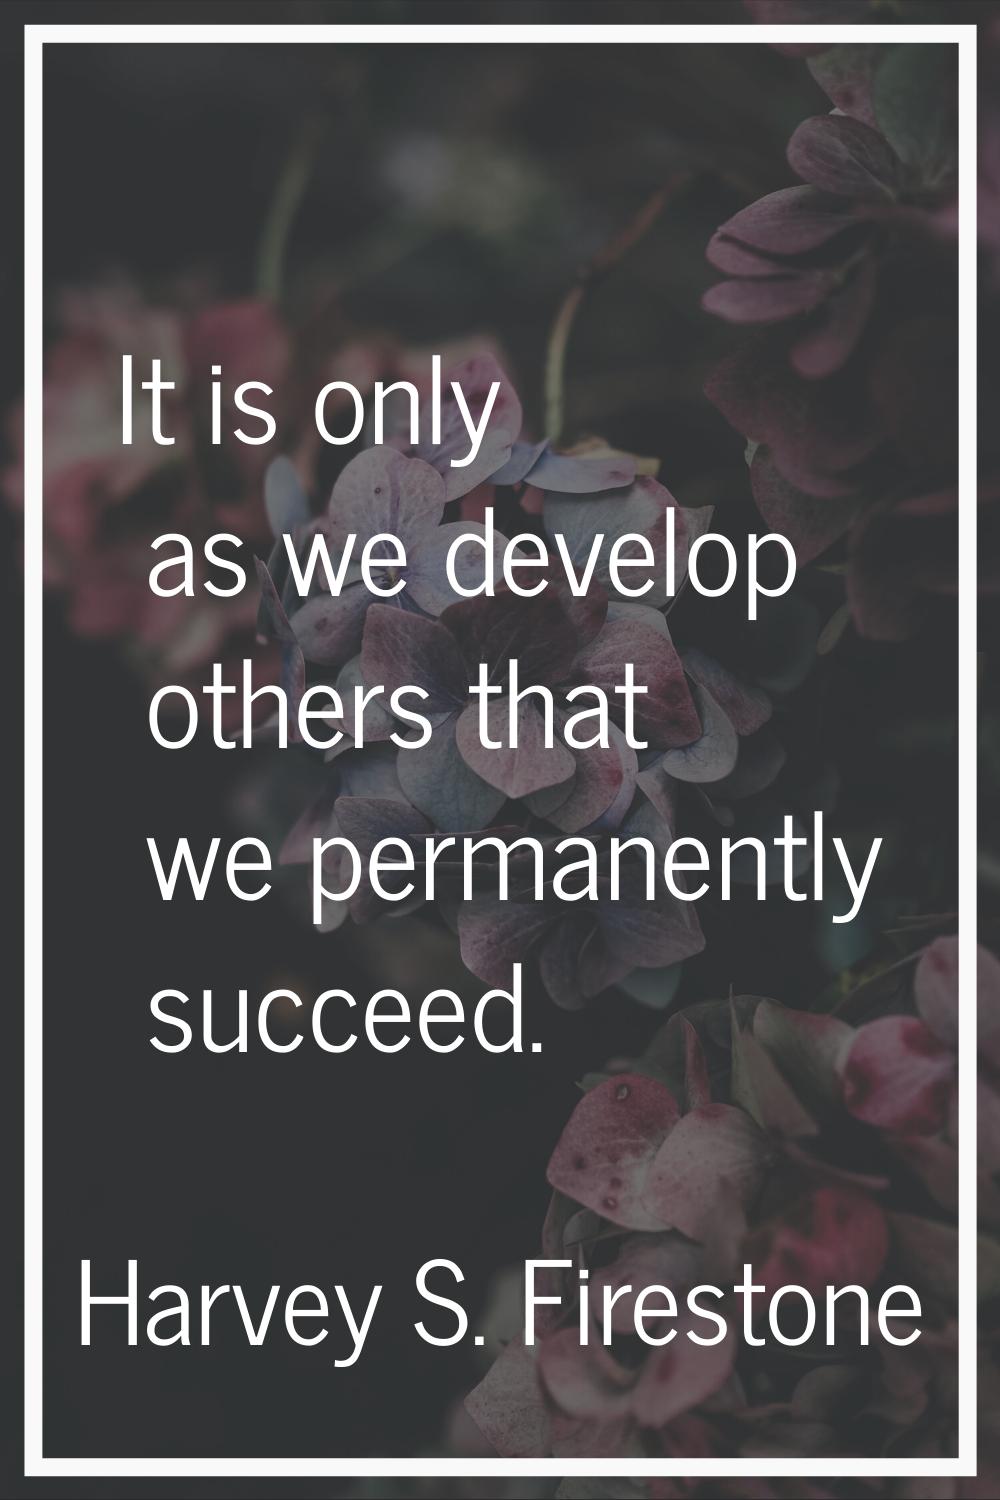 It is only as we develop others that we permanently succeed.